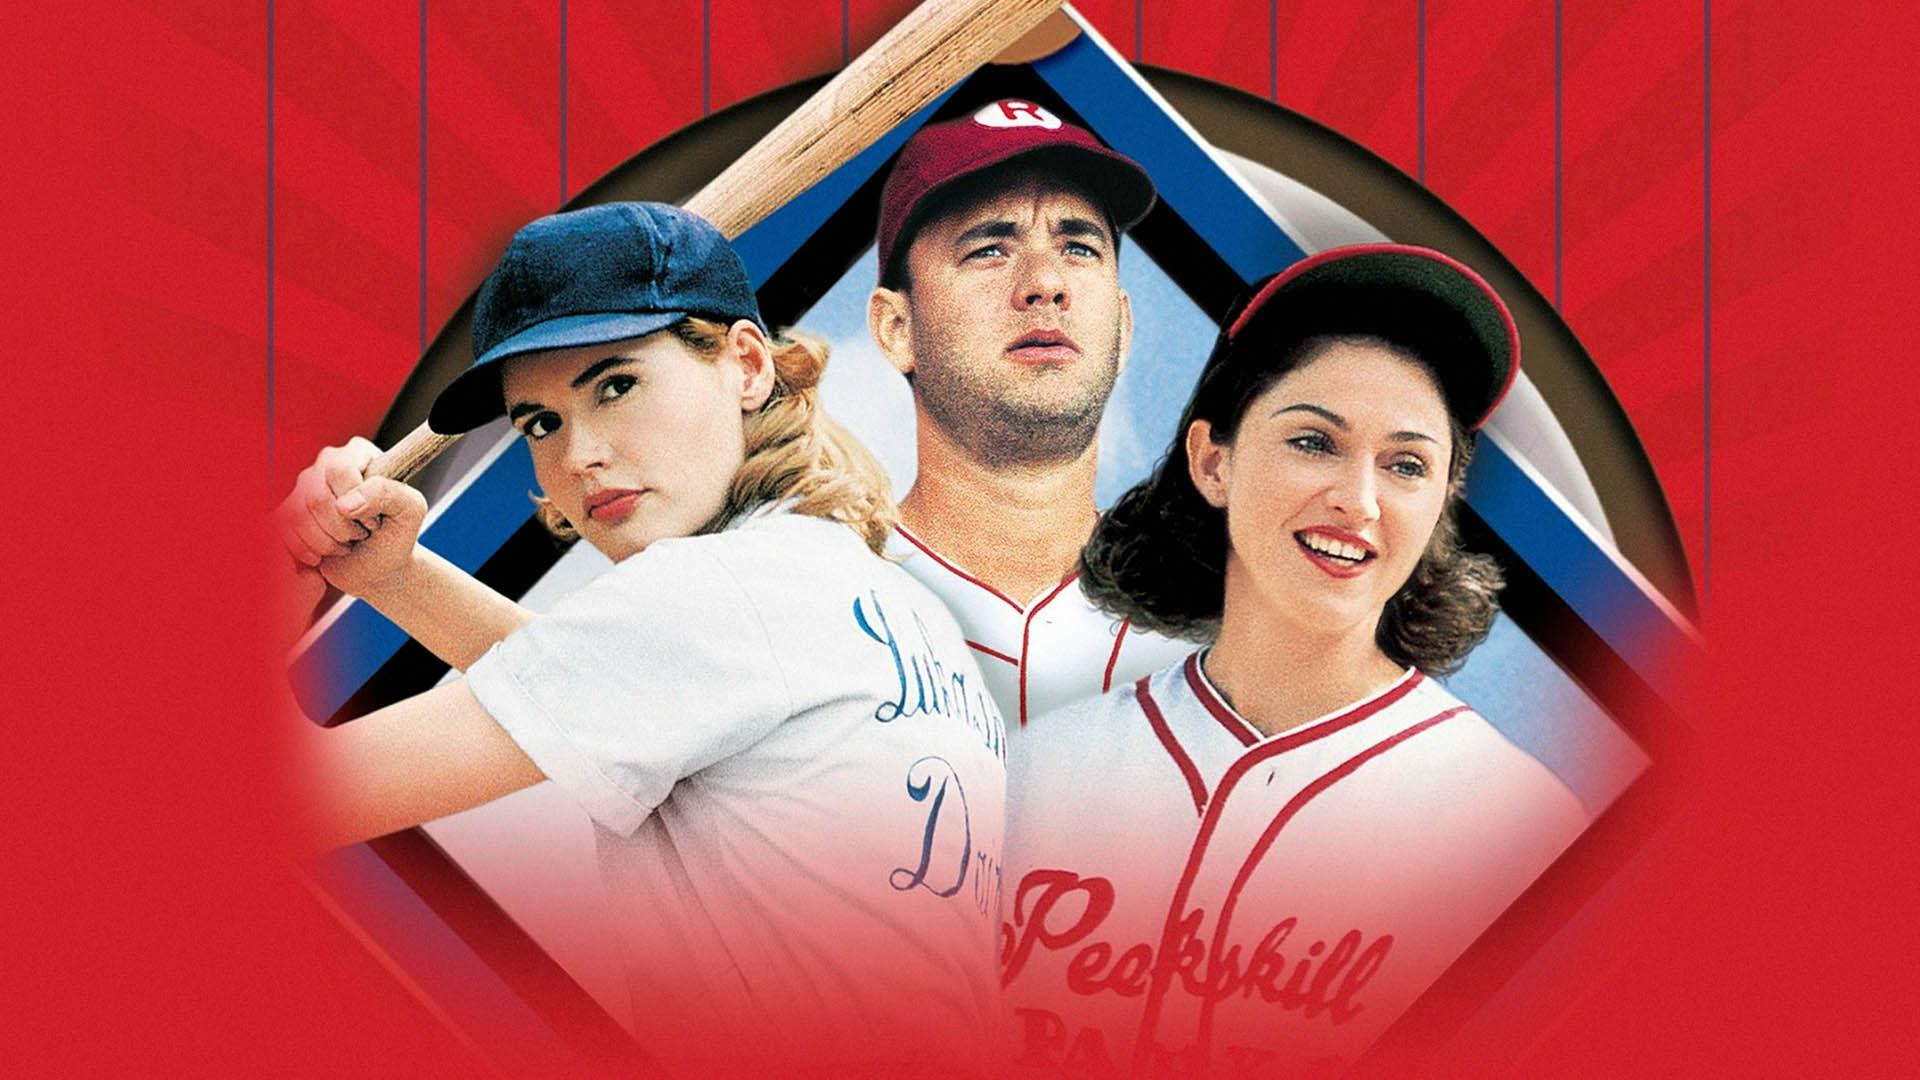 The main characters of the movie A League of Their Own